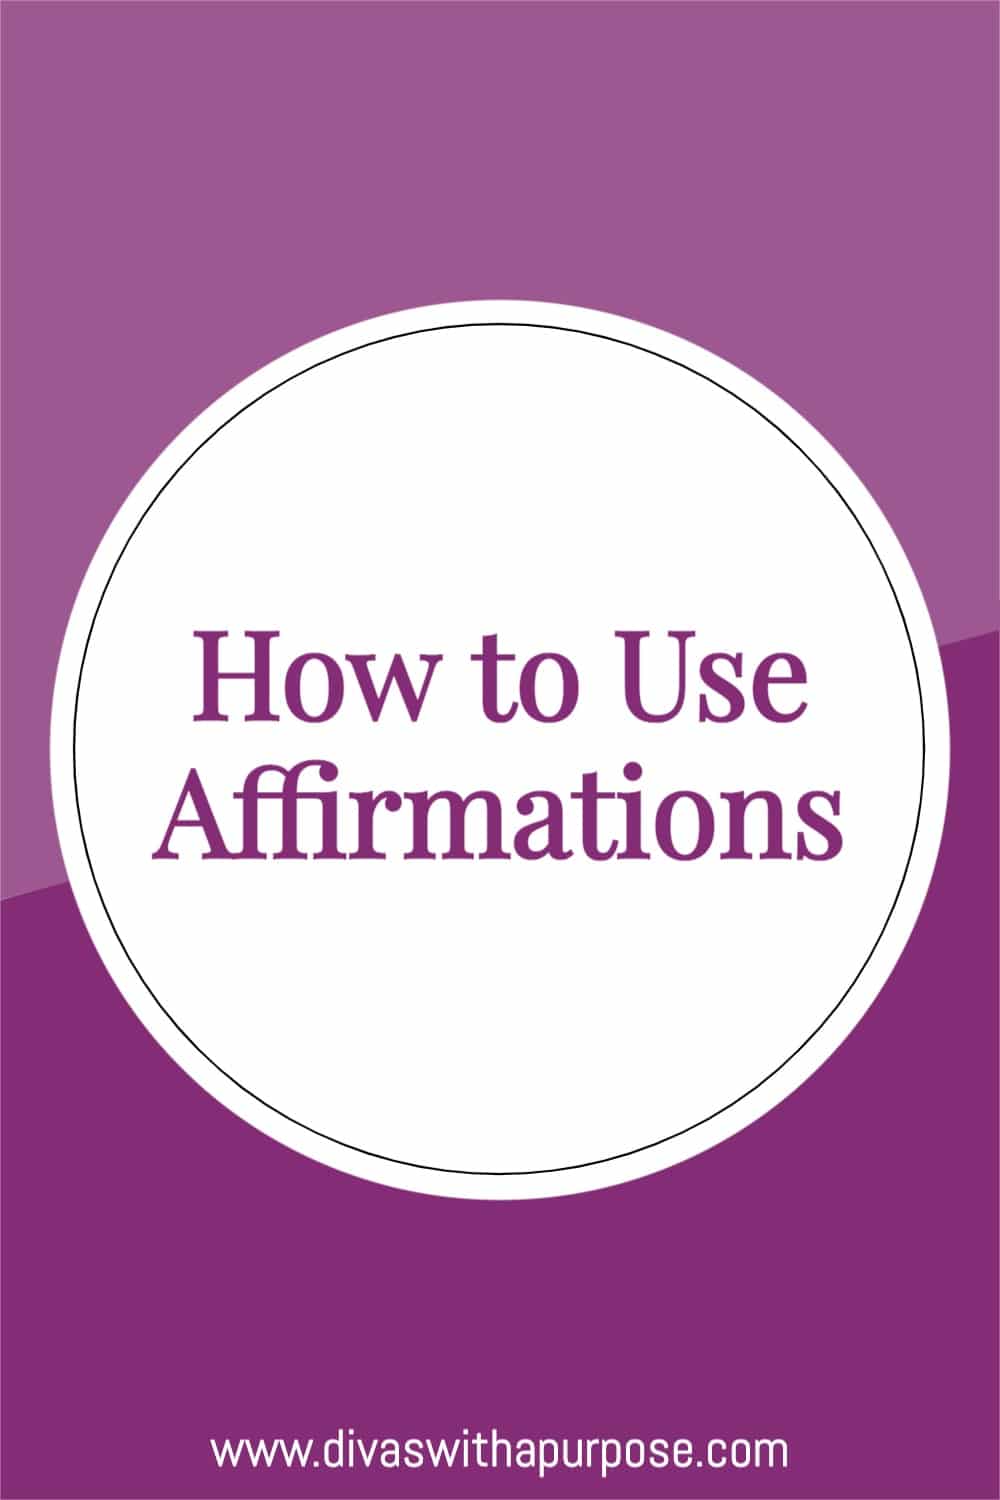 Affirmations can be a way of changing your thoughts and mindset, and improving your mental attitude. This article will tell you how to use affirmations in your daily routine.